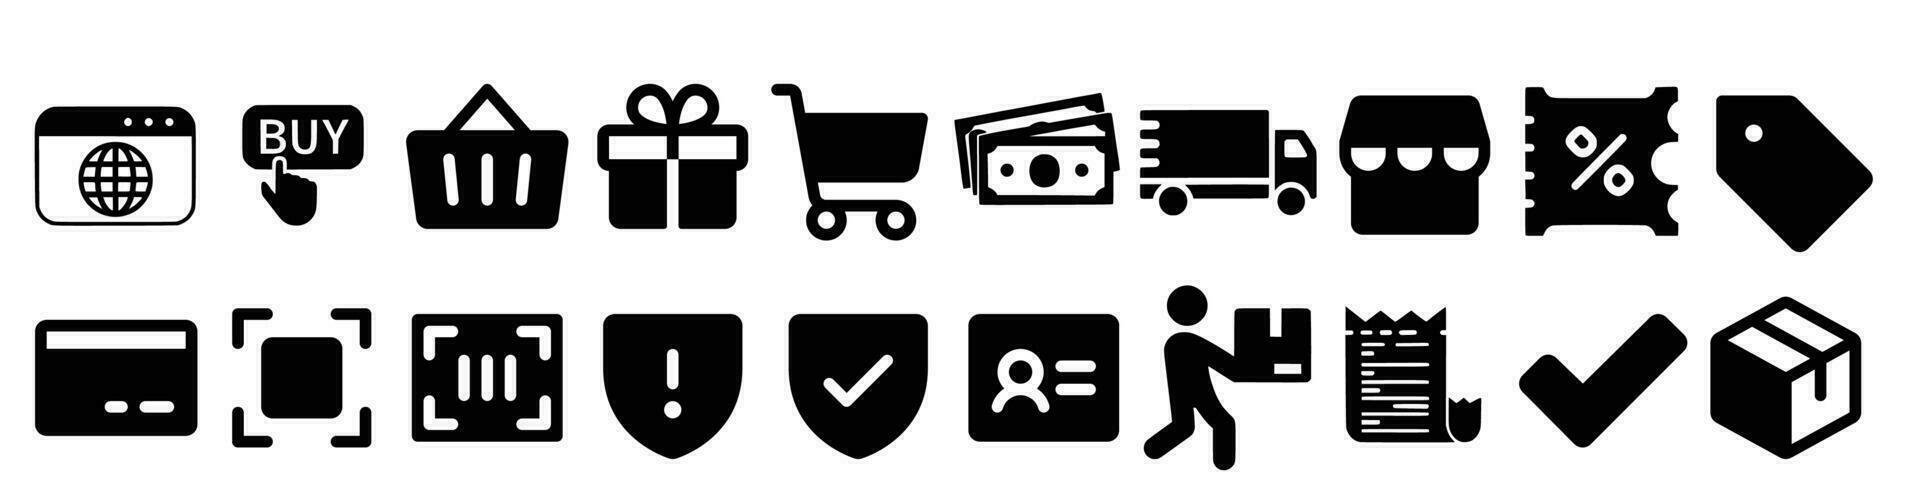 shopping discount and sale Fill icons. vector